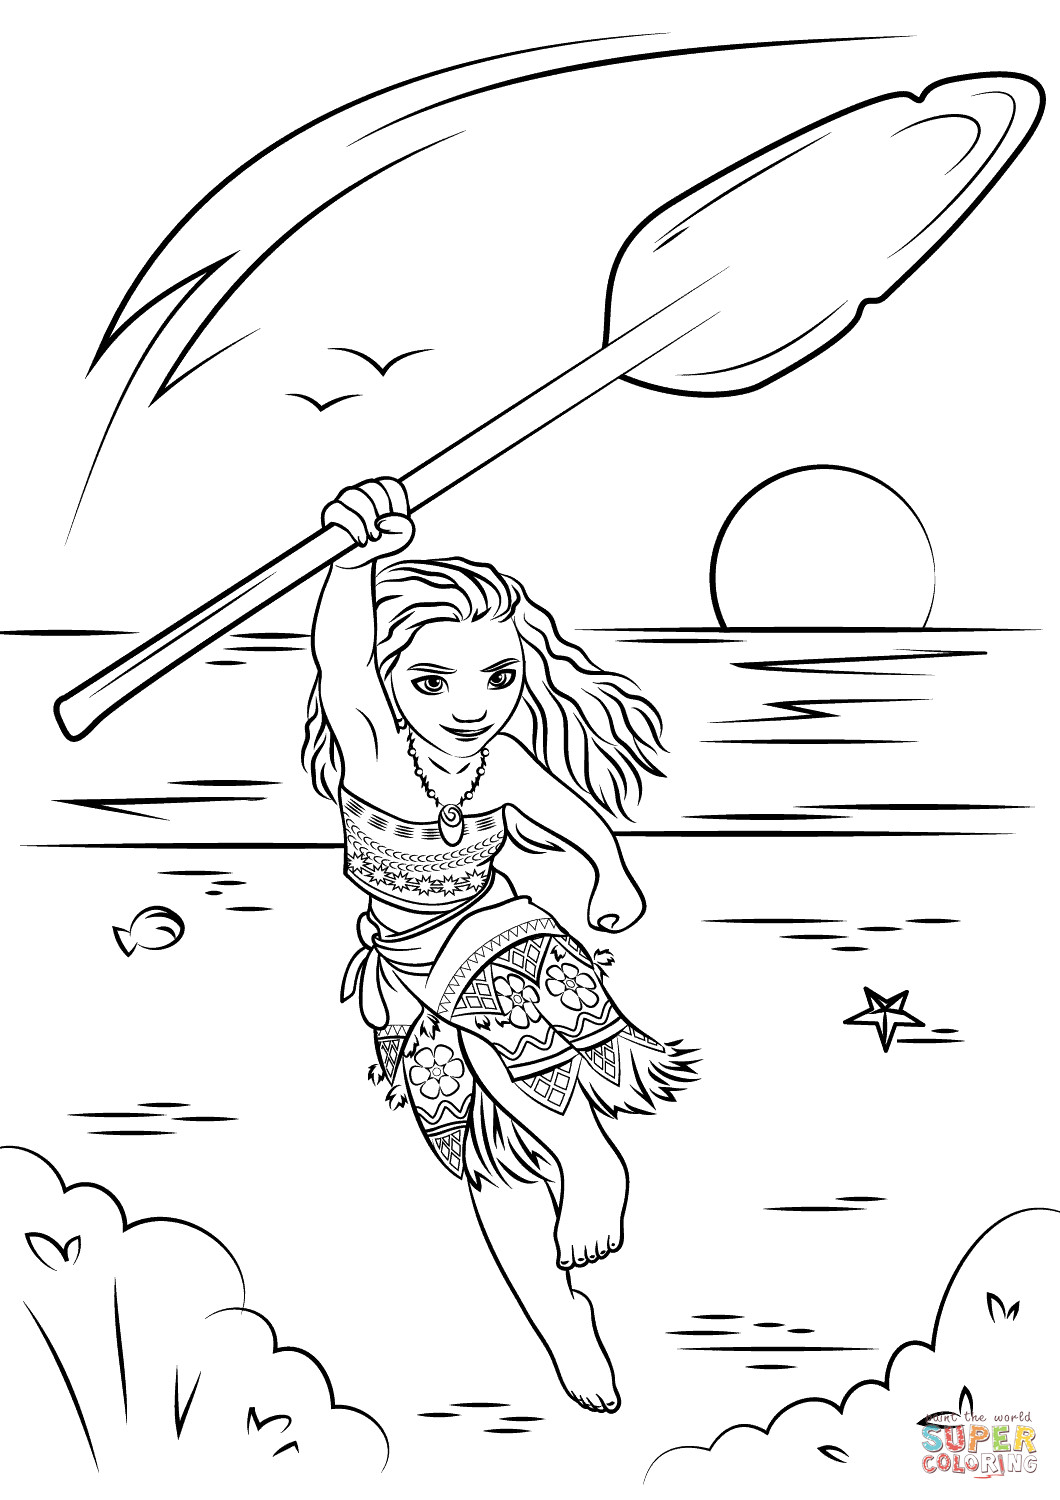 Moana Coloring Pages For Toddlers
 Moana coloring page